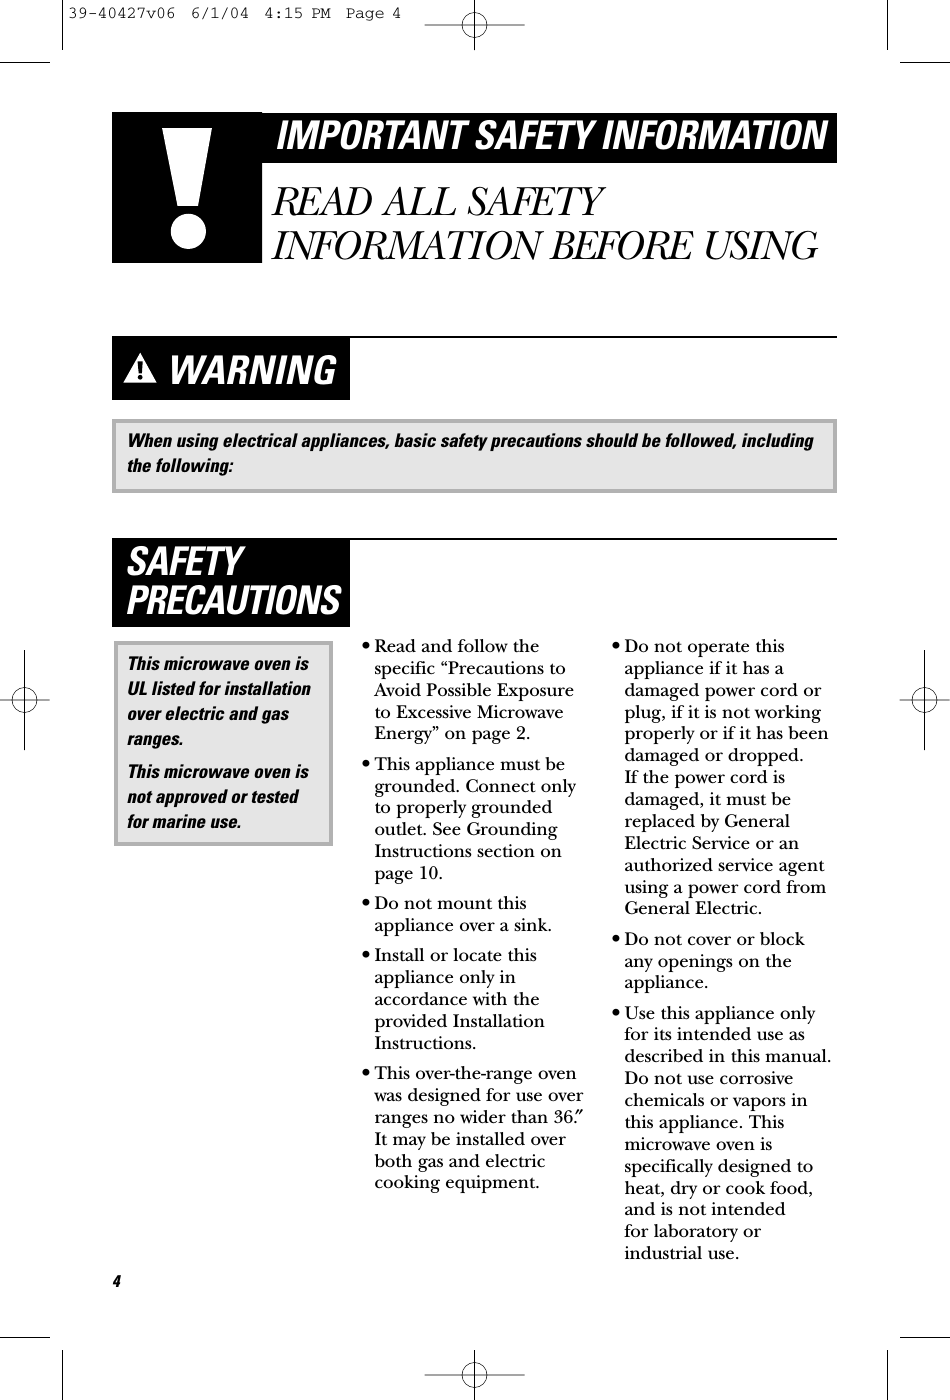 When using electrical appliances, basic safety precautions should be followed, includingthe following:WARNING•Read and follow thespecific “Precautions toAvoid Possible Exposureto Excessive MicrowaveEnergy” on page 2.•This appliance must begrounded. Connect onlyto properly groundedoutlet. See GroundingInstructions section onpage 10.•Do not mount thisappliance over a sink. •Install or locate thisappliance only inaccordance with theprovided InstallationInstructions.•This over-the-range ovenwas designed for use overranges no wider than 36.″It may be installed overboth gas and electriccooking equipment.•Do not operate thisappliance if it has adamaged power cord orplug, if it is not workingproperly or if it has beendamaged or dropped. If the power cord isdamaged, it must bereplaced by GeneralElectric Service or anauthorized service agentusing a power cord fromGeneral Electric.•Do not cover or block any openings on theappliance.•Use this appliance onlyfor its intended use asdescribed in this manual.Do not use corrosivechemicals or vapors inthis appliance. Thismicrowave oven isspecifically designed toheat, dry or cook food,and is not intended for laboratory orindustrial use.This microwave oven isUL listed for installationover electric and gasranges.This microwave oven isnot approved or testedfor marine use.SAFETYPRECAUTIONS4IMPORTANT SAFETY INFORMATIONREAD ALL SAFETYINFORMATION BEFORE USING39-40427v06  6/1/04  4:15 PM  Page 4